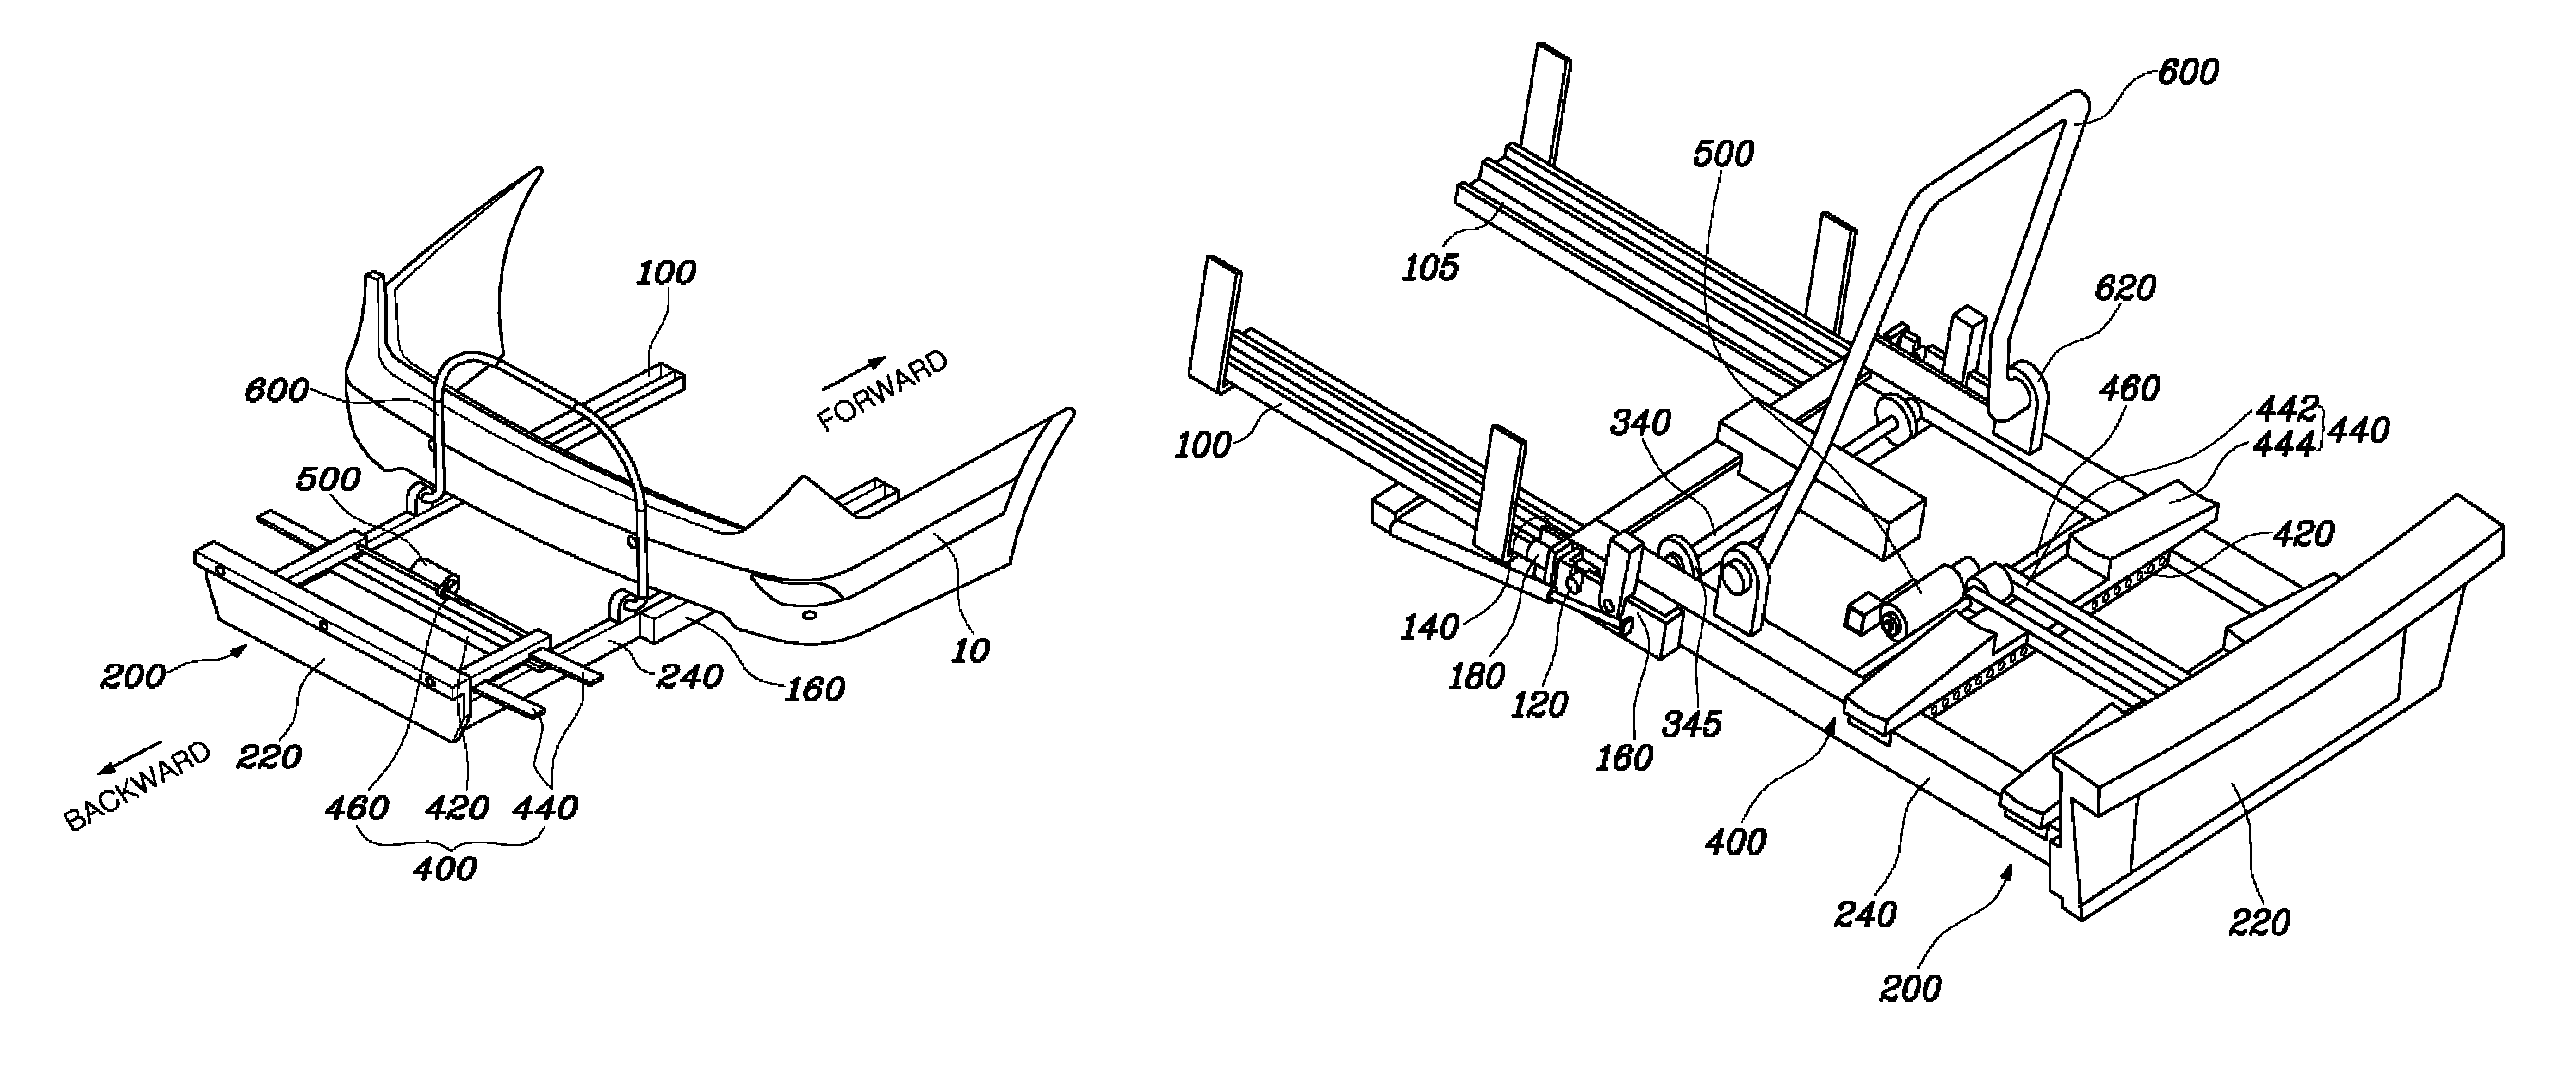 Bicycle carrier apparatus for vehicle